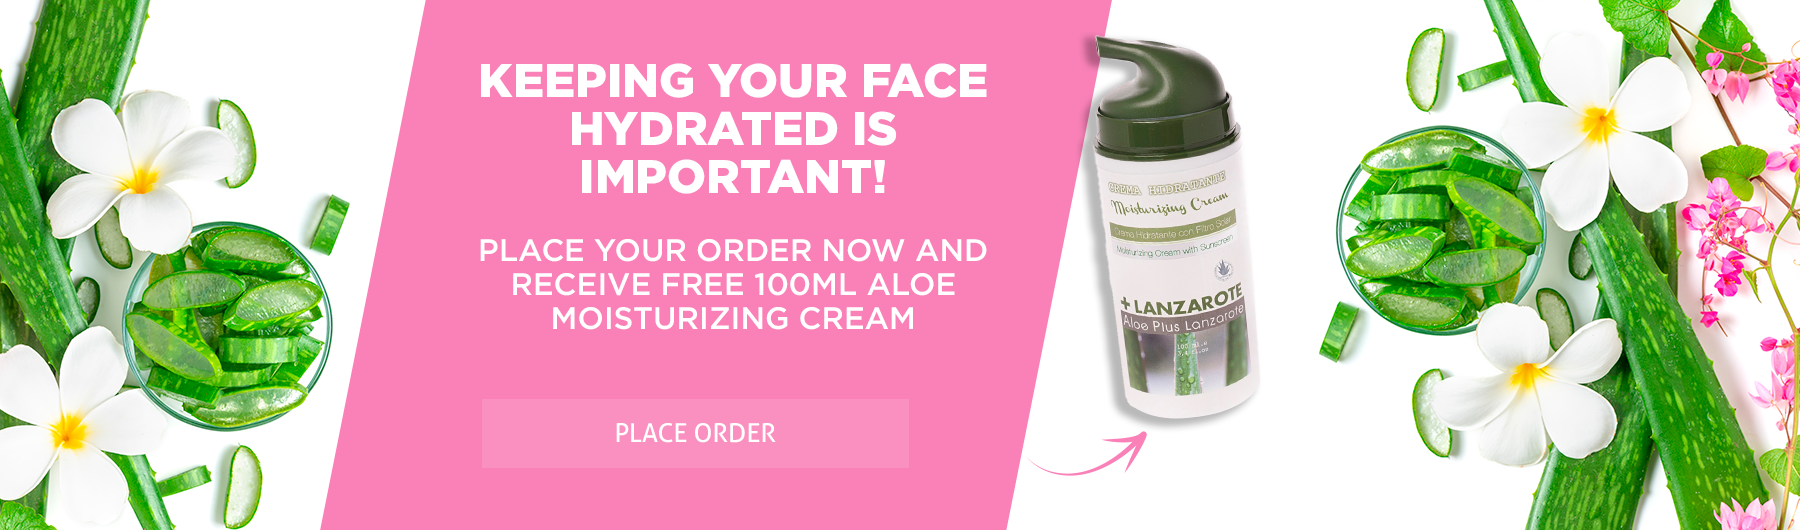 Place your order now and receive free 100ml aloe moisturizing cream